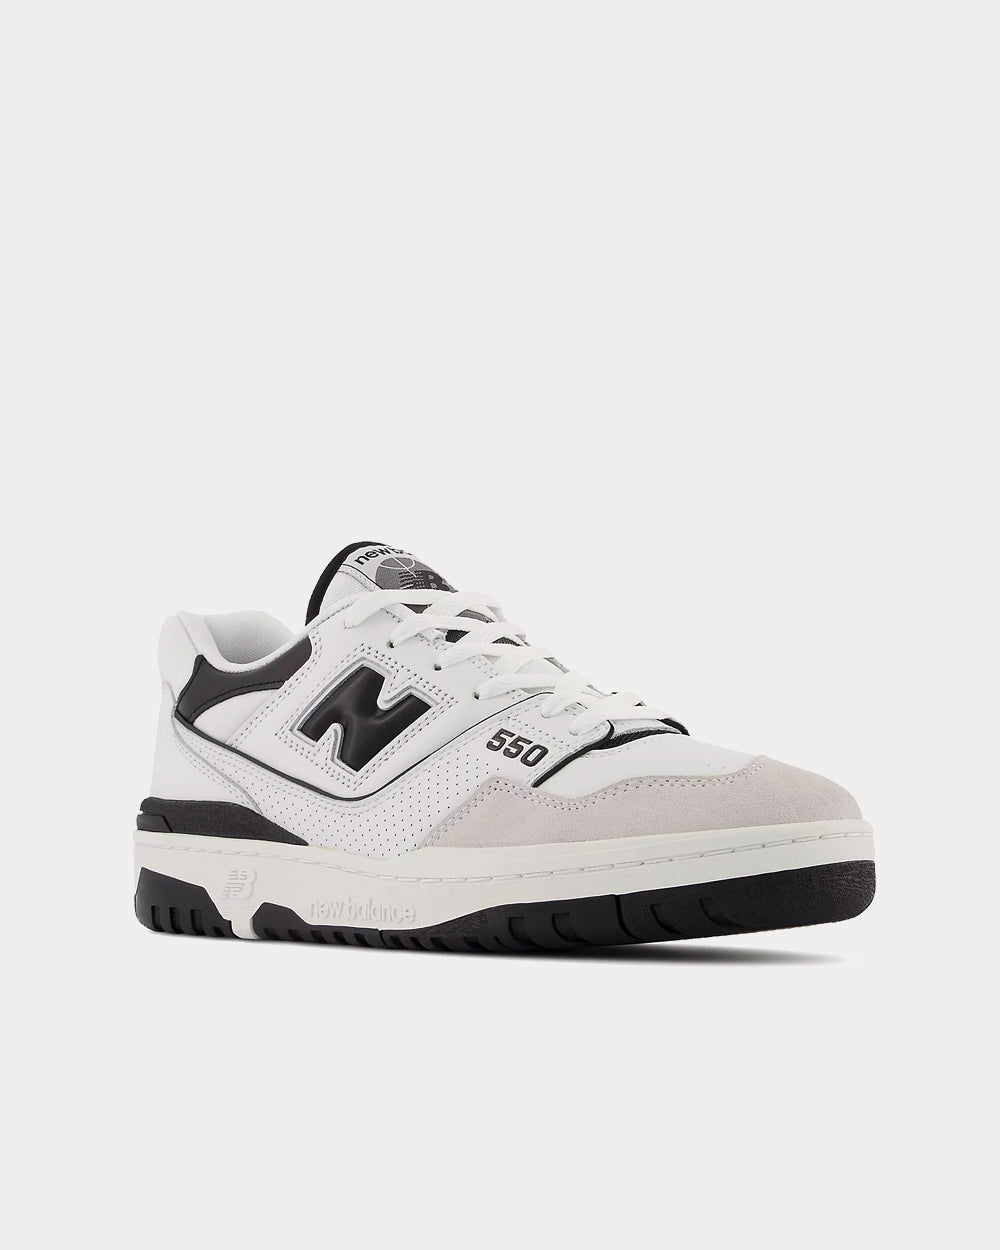 New Balance - 550 Sea Salt with Black Low Top Sneakers